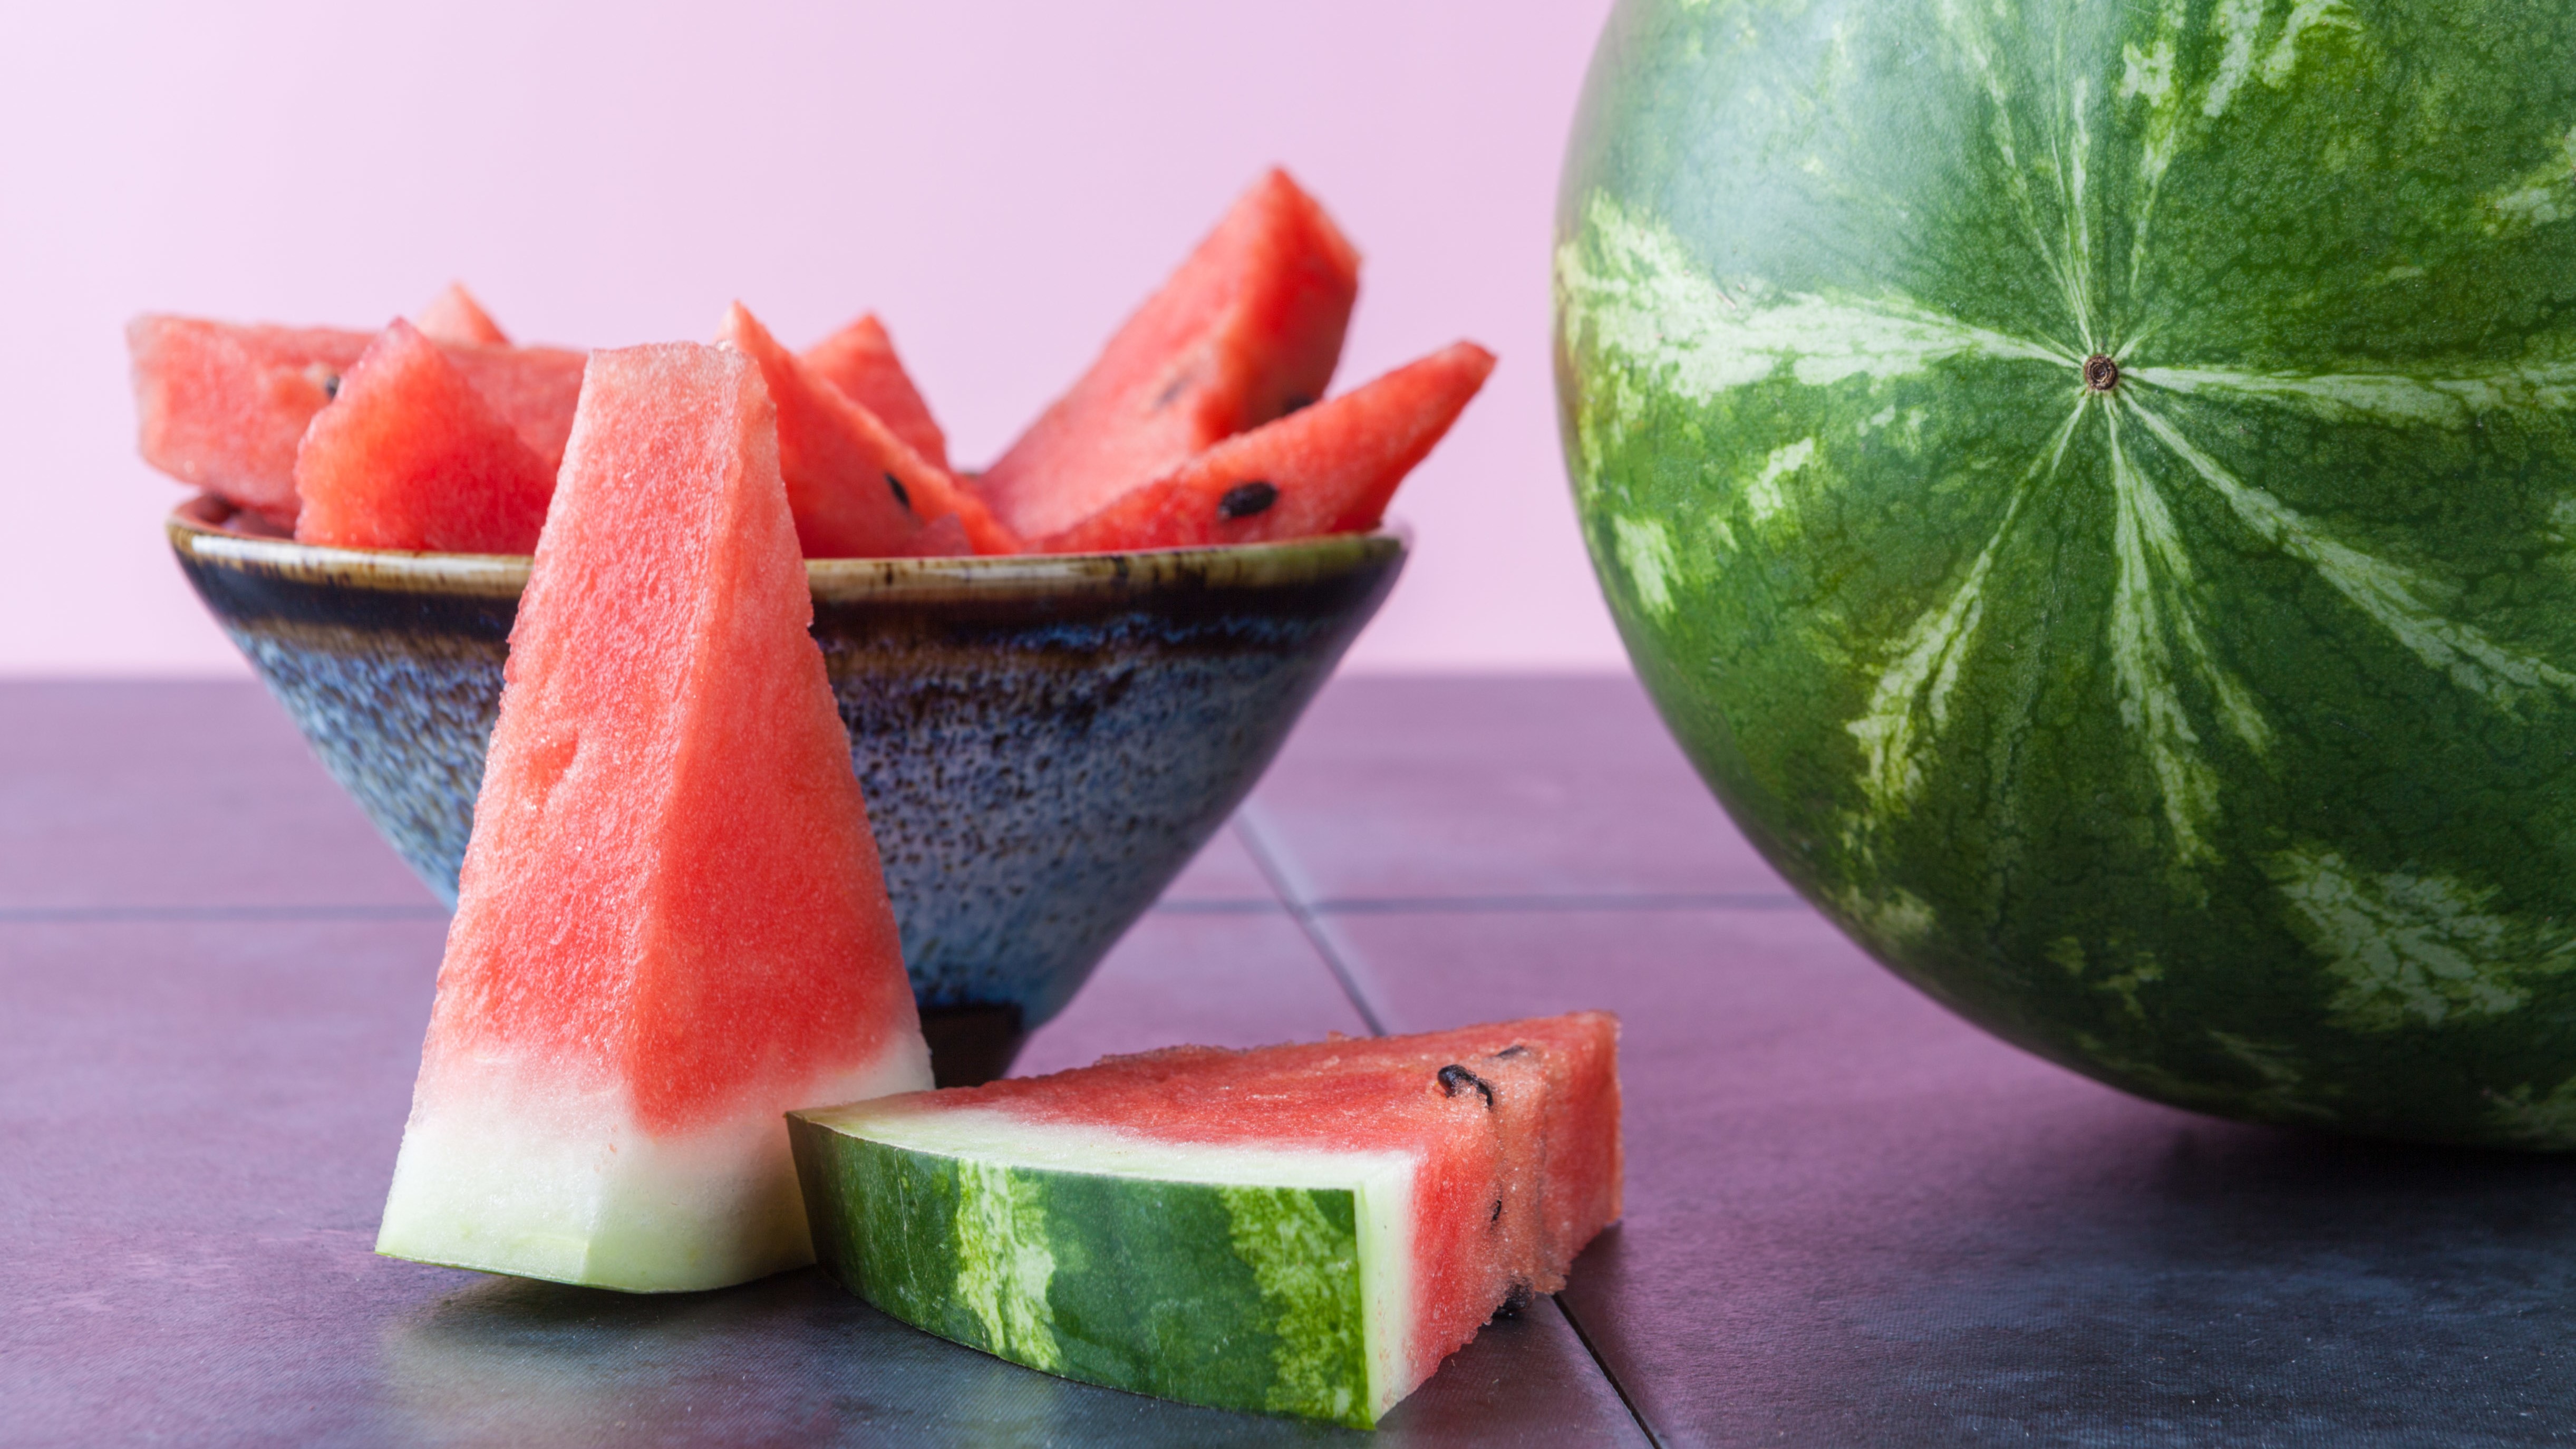 Watermelon: Health benefits, risks &amp; nutrition facts | Live Science